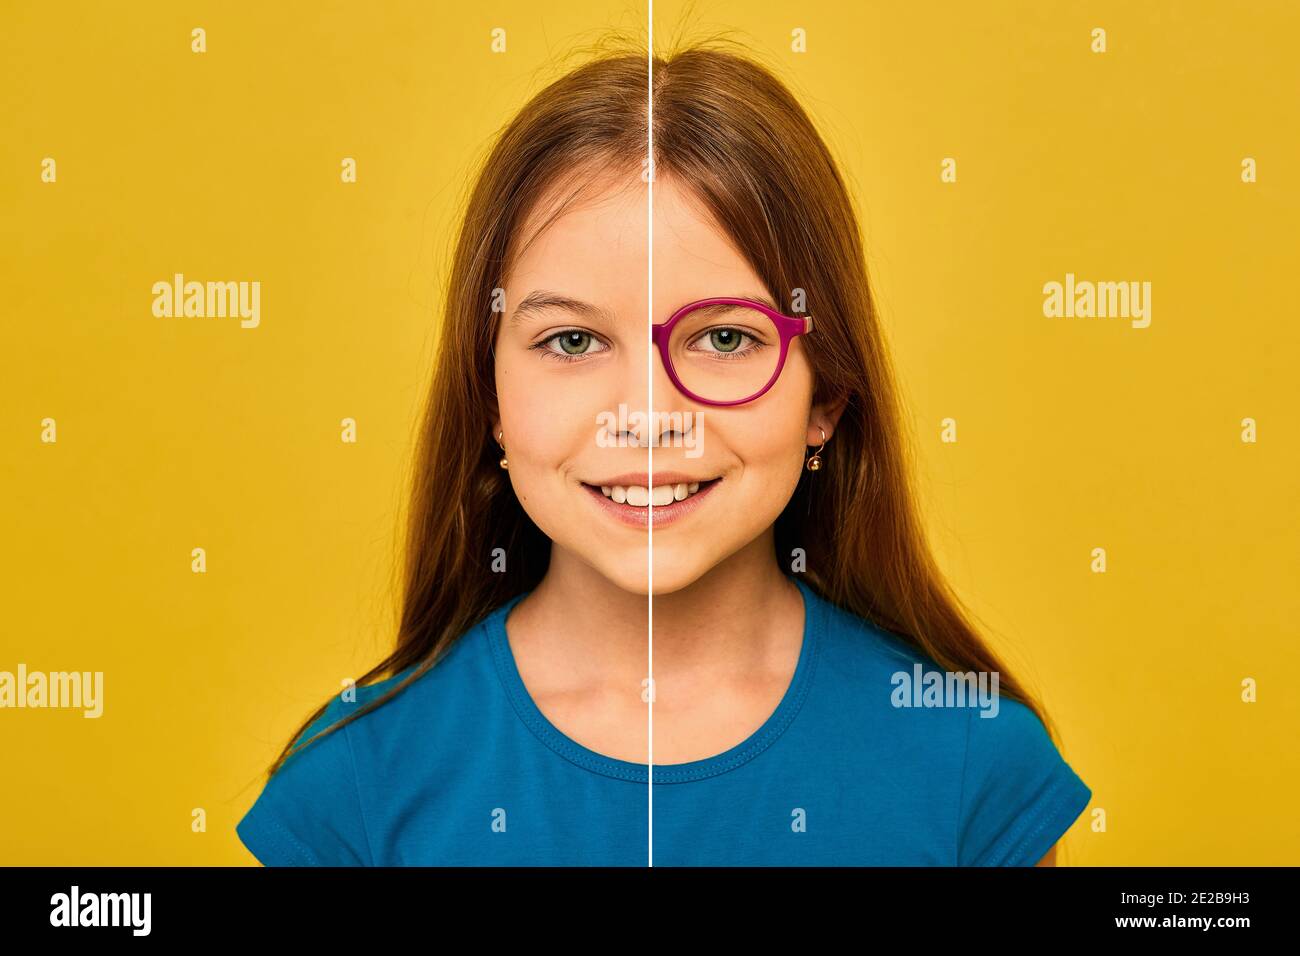 Caucasian girl face, cut in half to present before and after checking vision. Child face without glasses and with glasses on yellow background Stock Photo